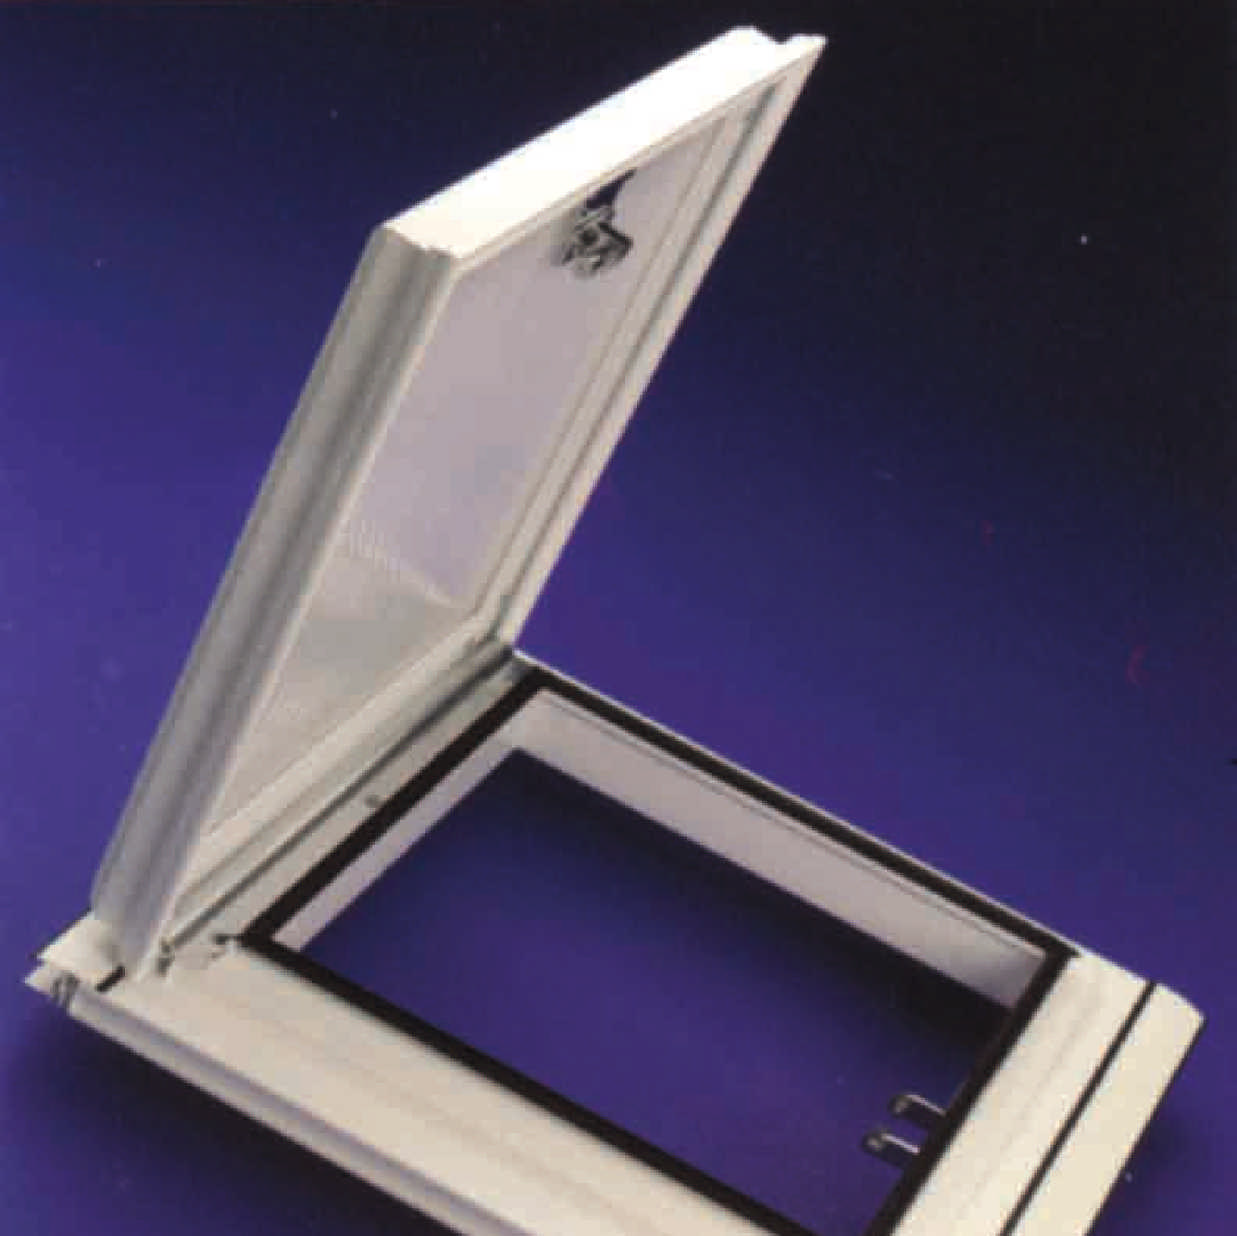 Buy Aluminium/uPVC Conservatory Roof Vent (Bar-to-Bar) for 35mm thick polycarbonate online today